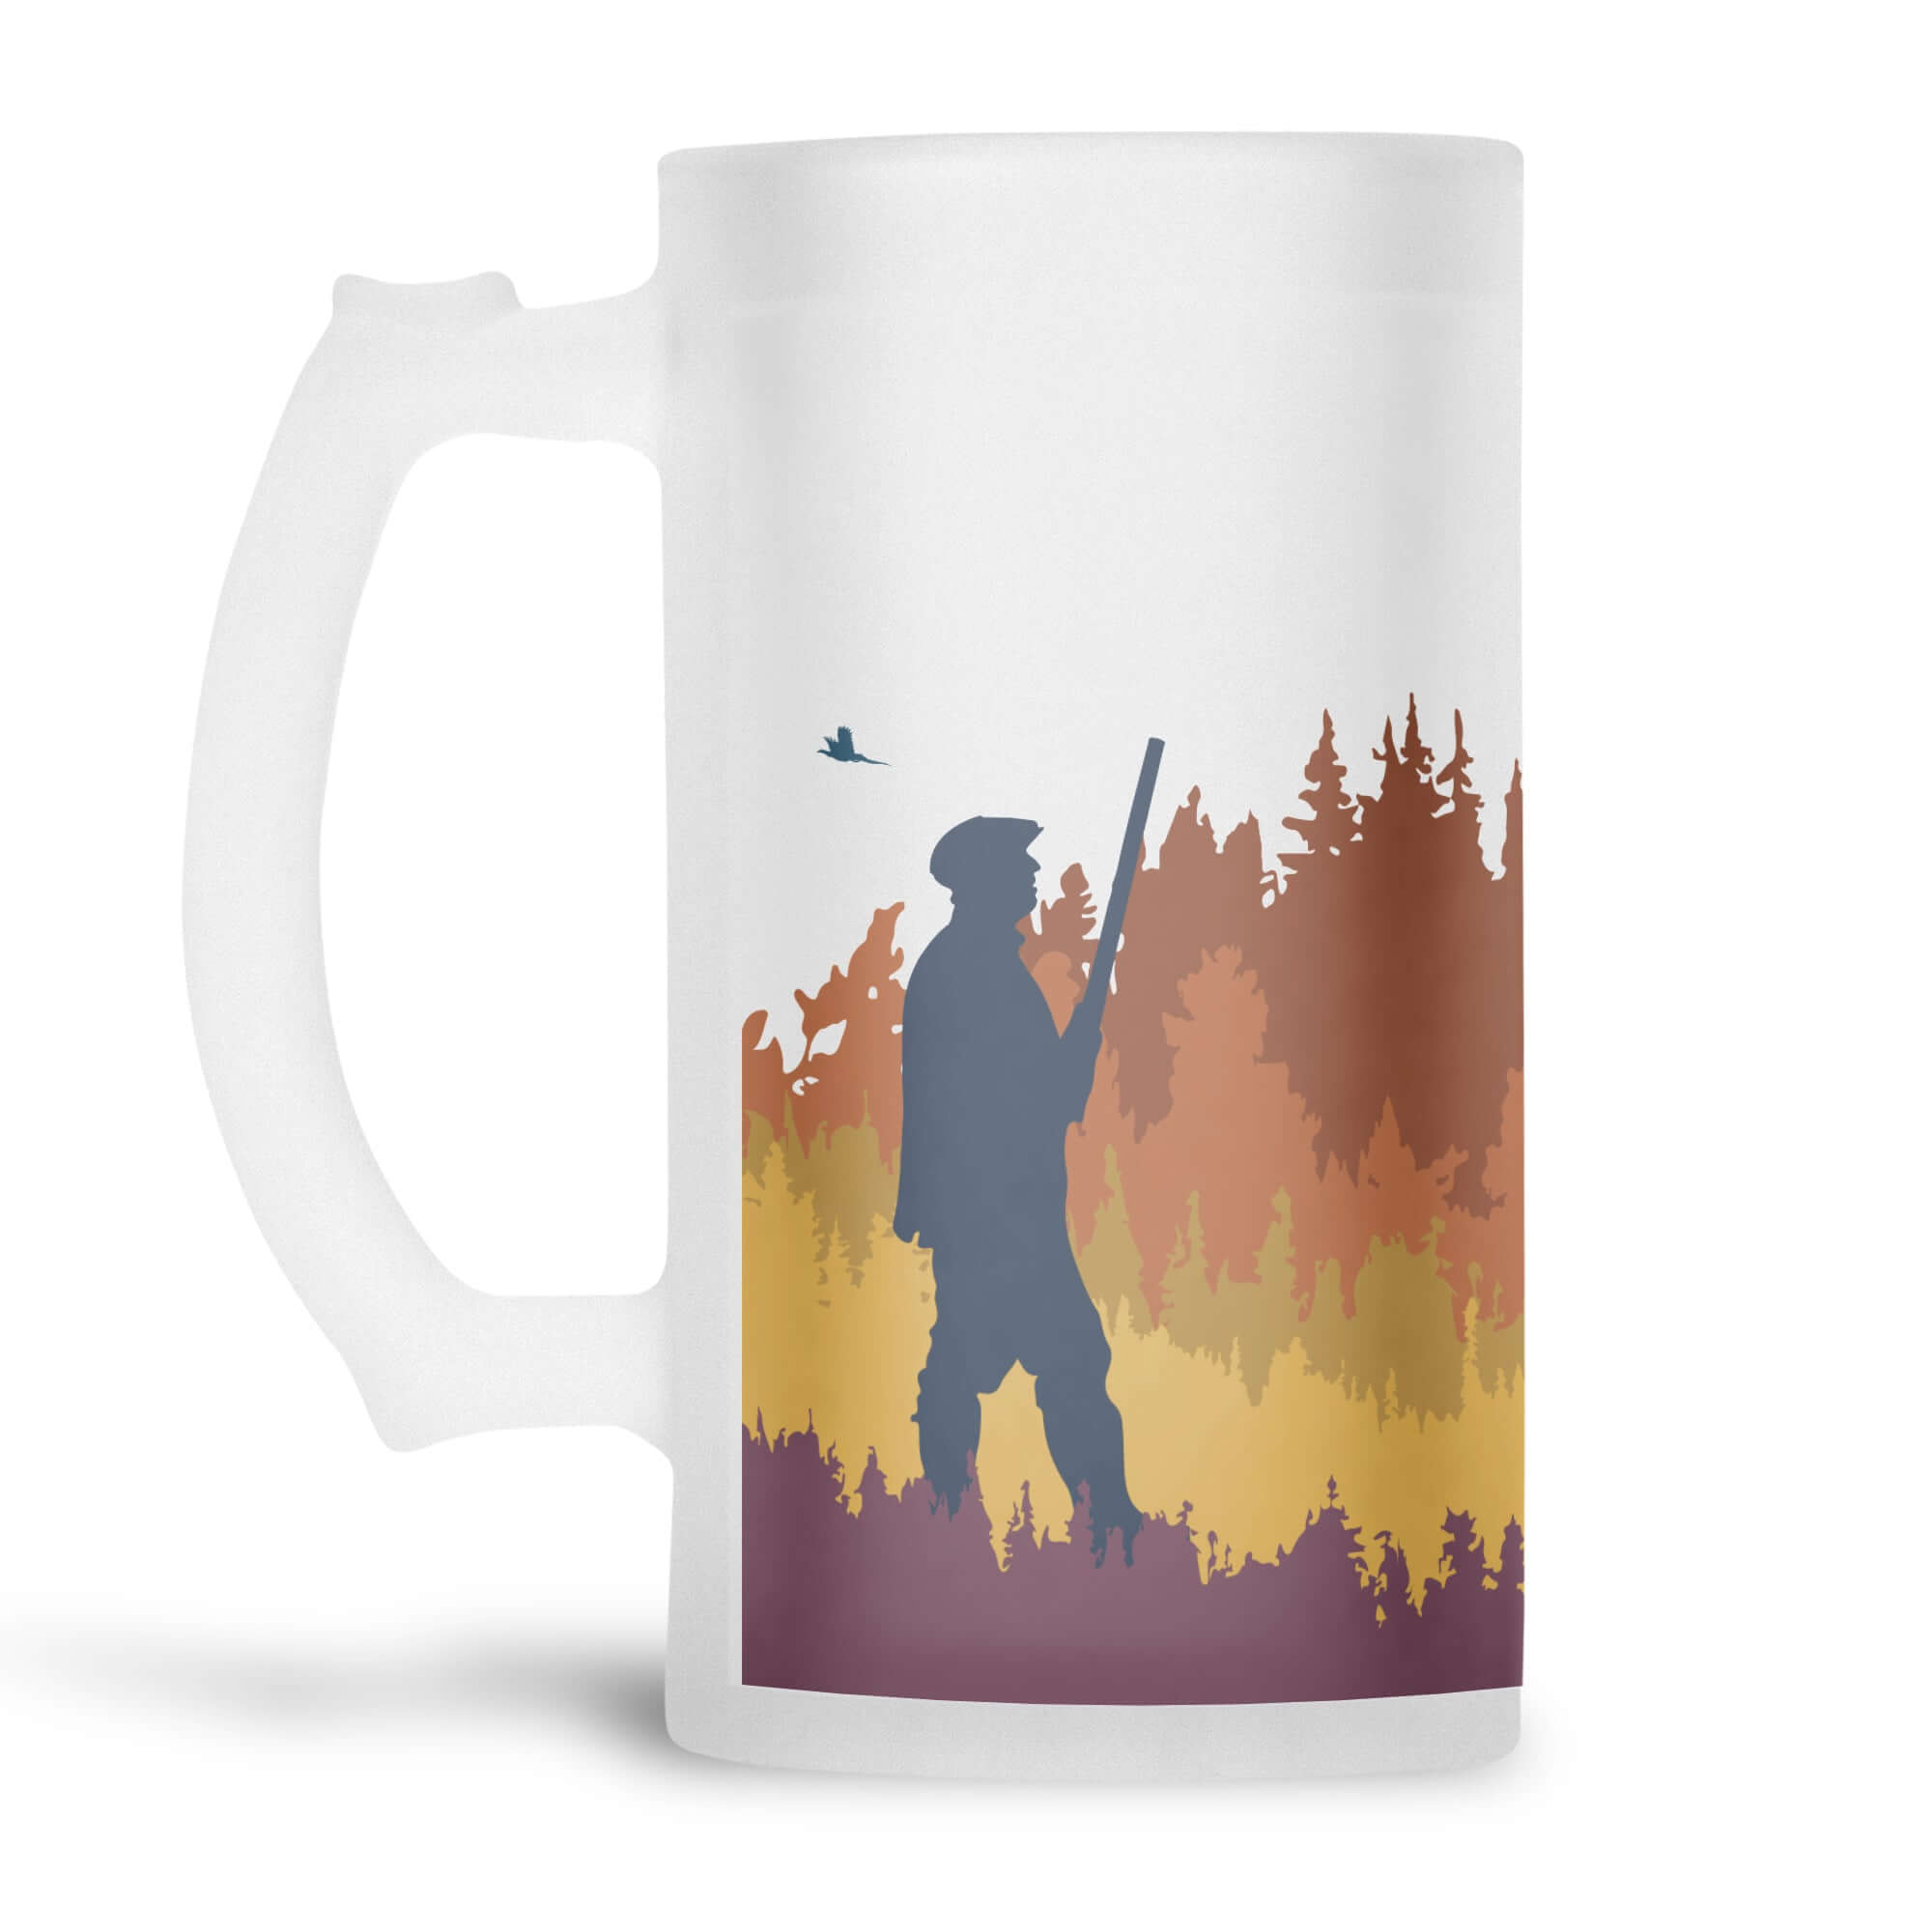 Autumn Game Shoot frosted glass beer stein with handle with autumnal trees in orange and yellow, navy gun and purple brash. Pheasant shooting, duck hunting gift. From Mustard and Gray